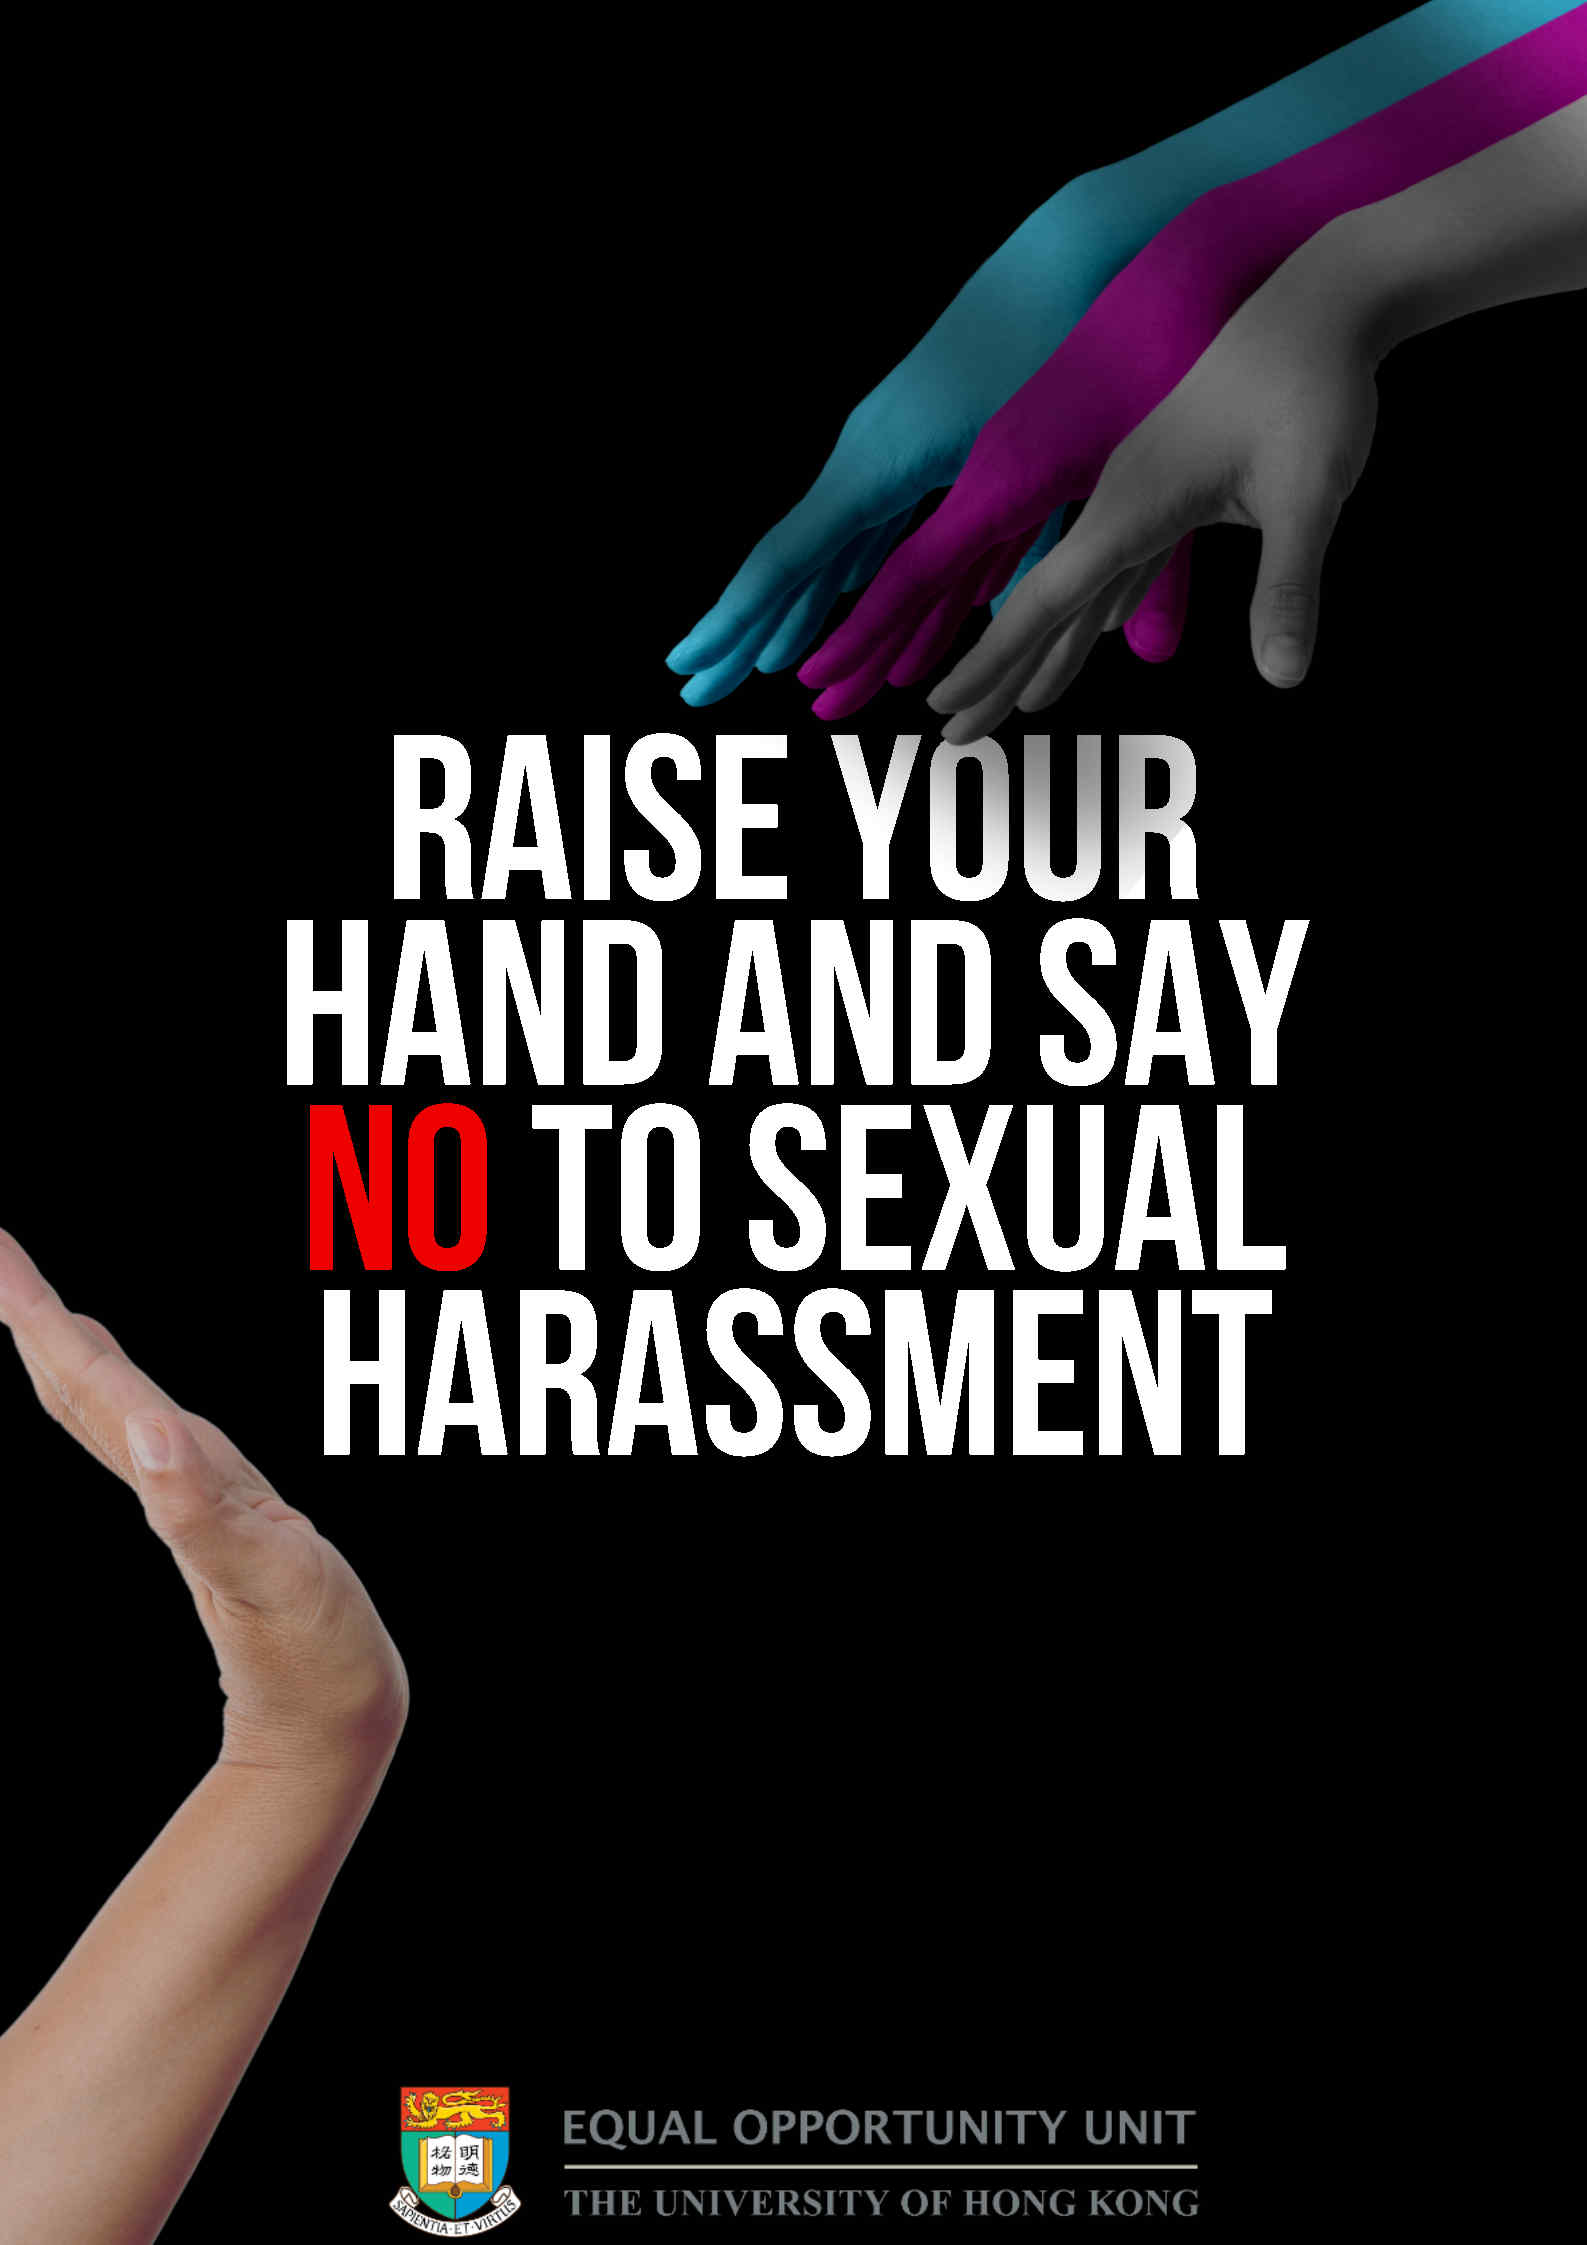 2nd Runner-up: Raise Your Hand and Say NO to Sexual Harassment (Description as the text on the webpage)